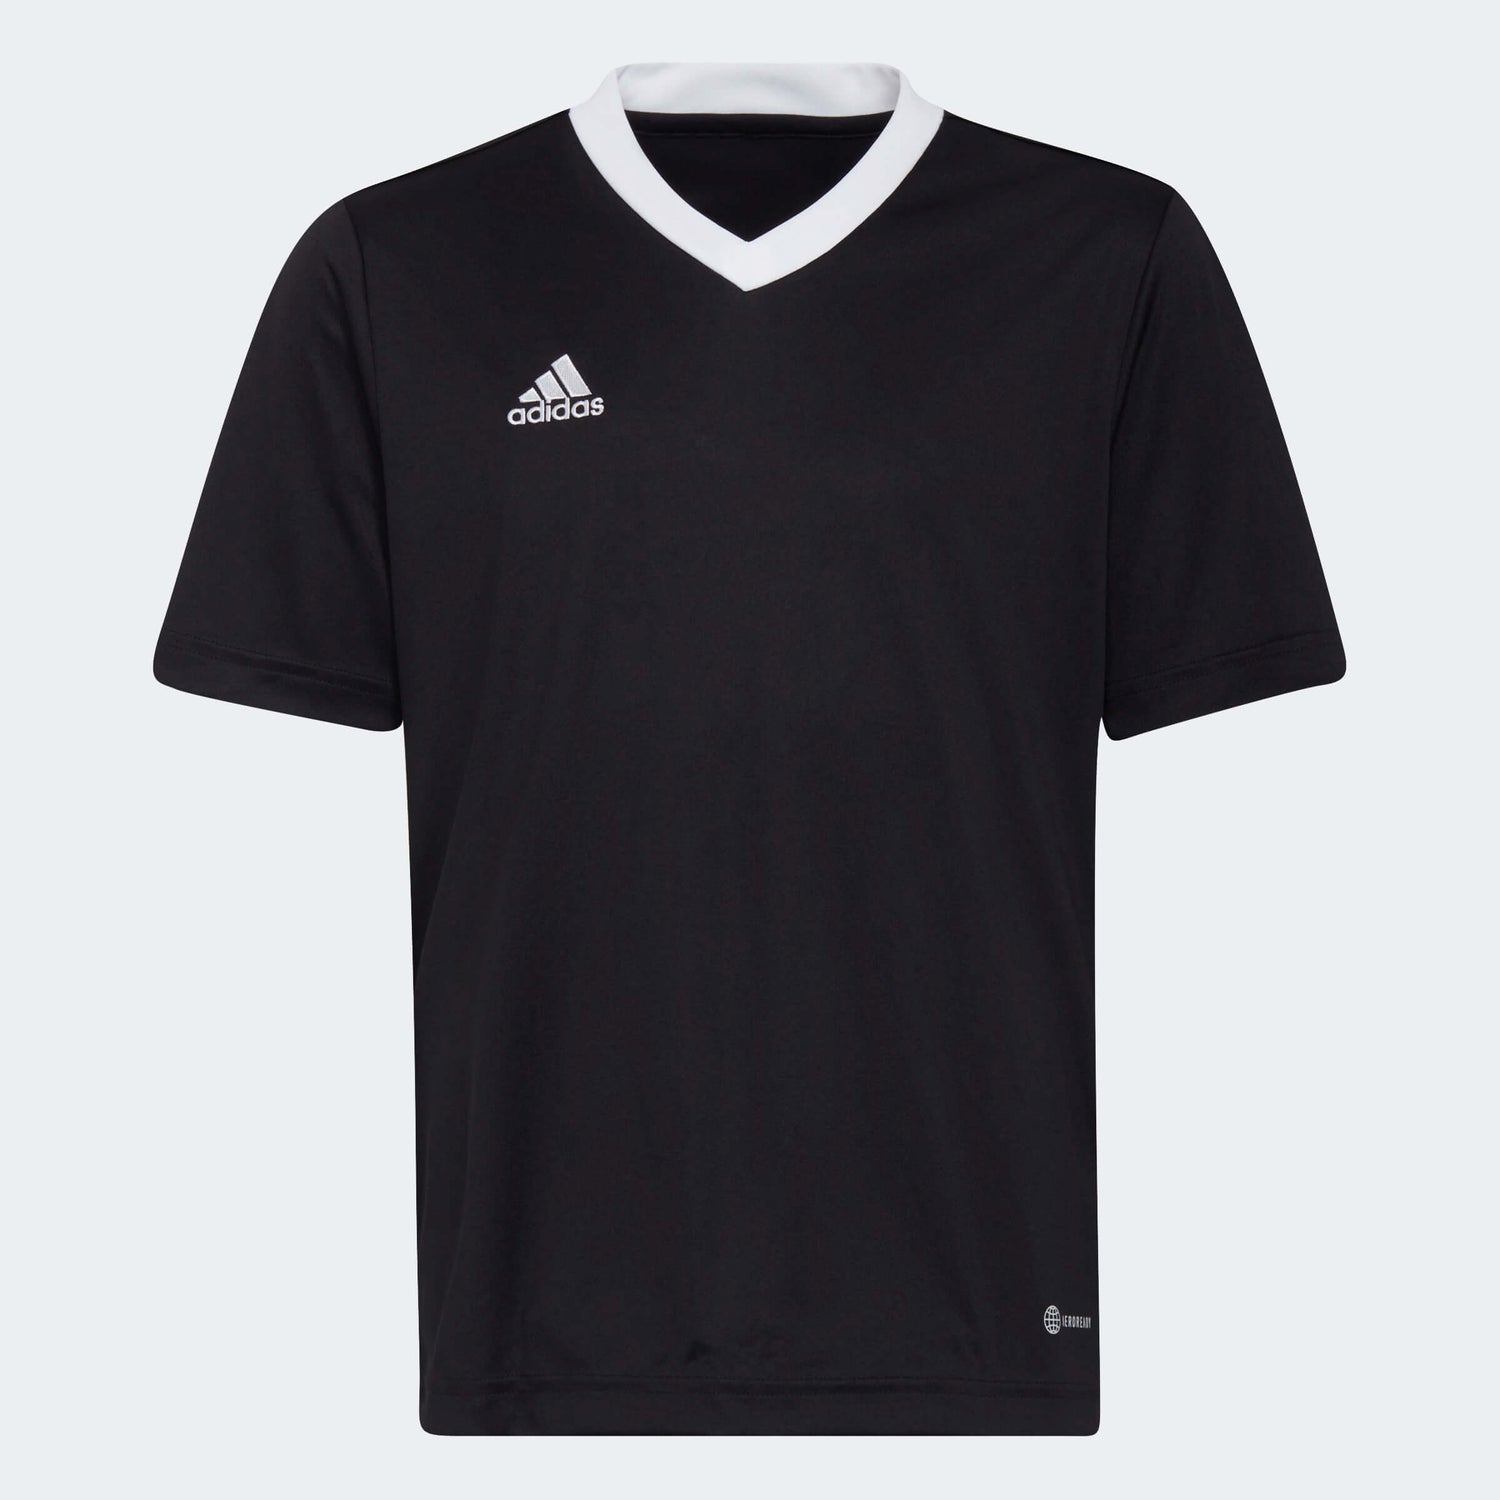 adidas Entrada 22 Youth Jersey Black-White (Front)